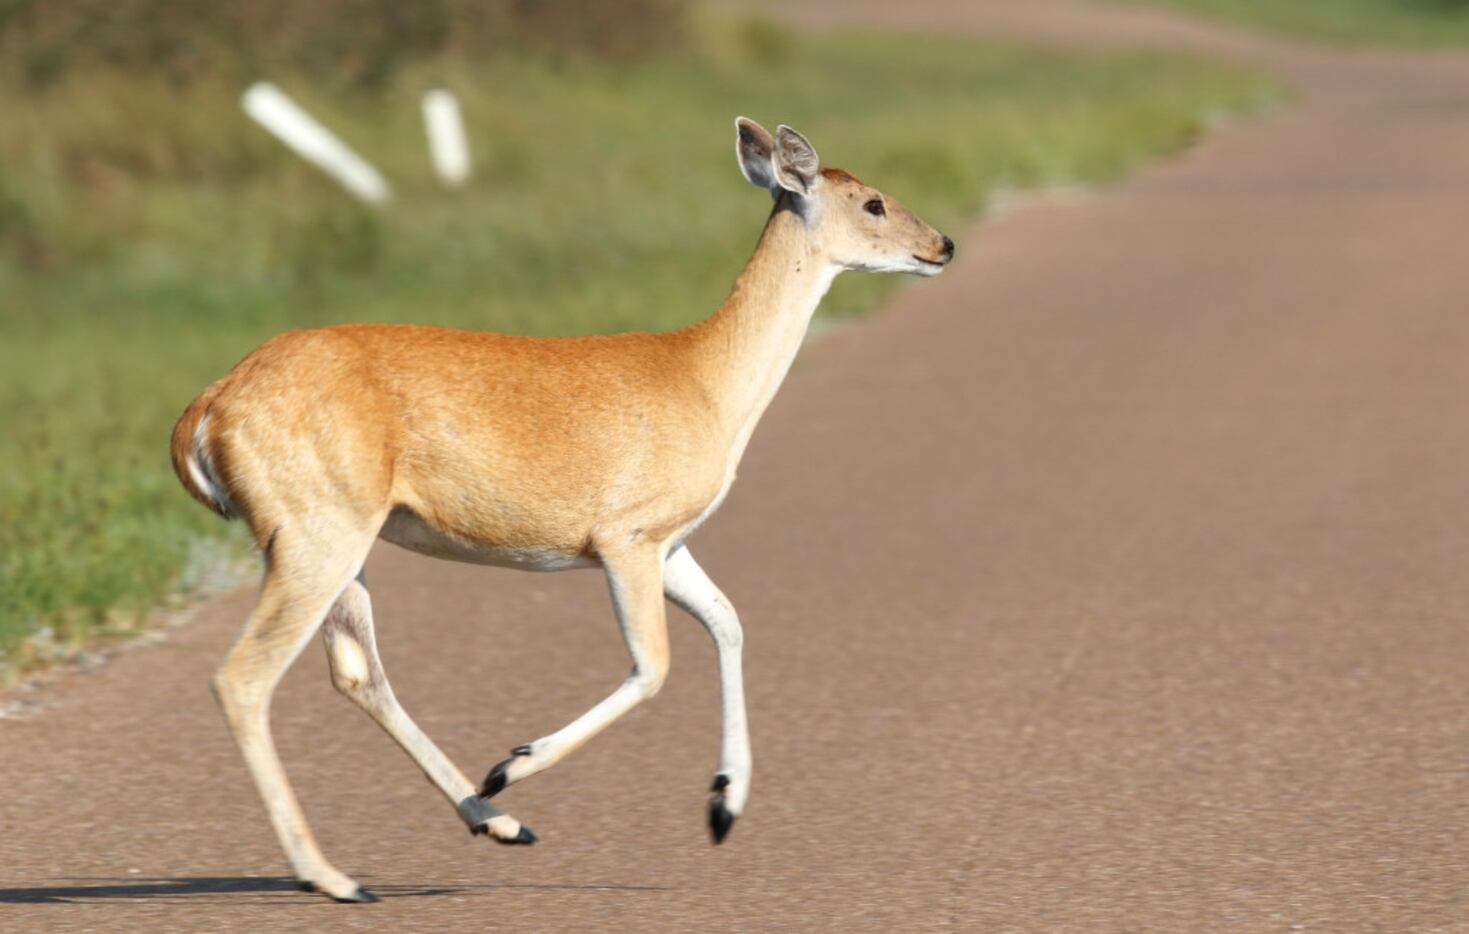 A White-tailed deer runs across the road at the Aransas National Wildlife Refuge in...